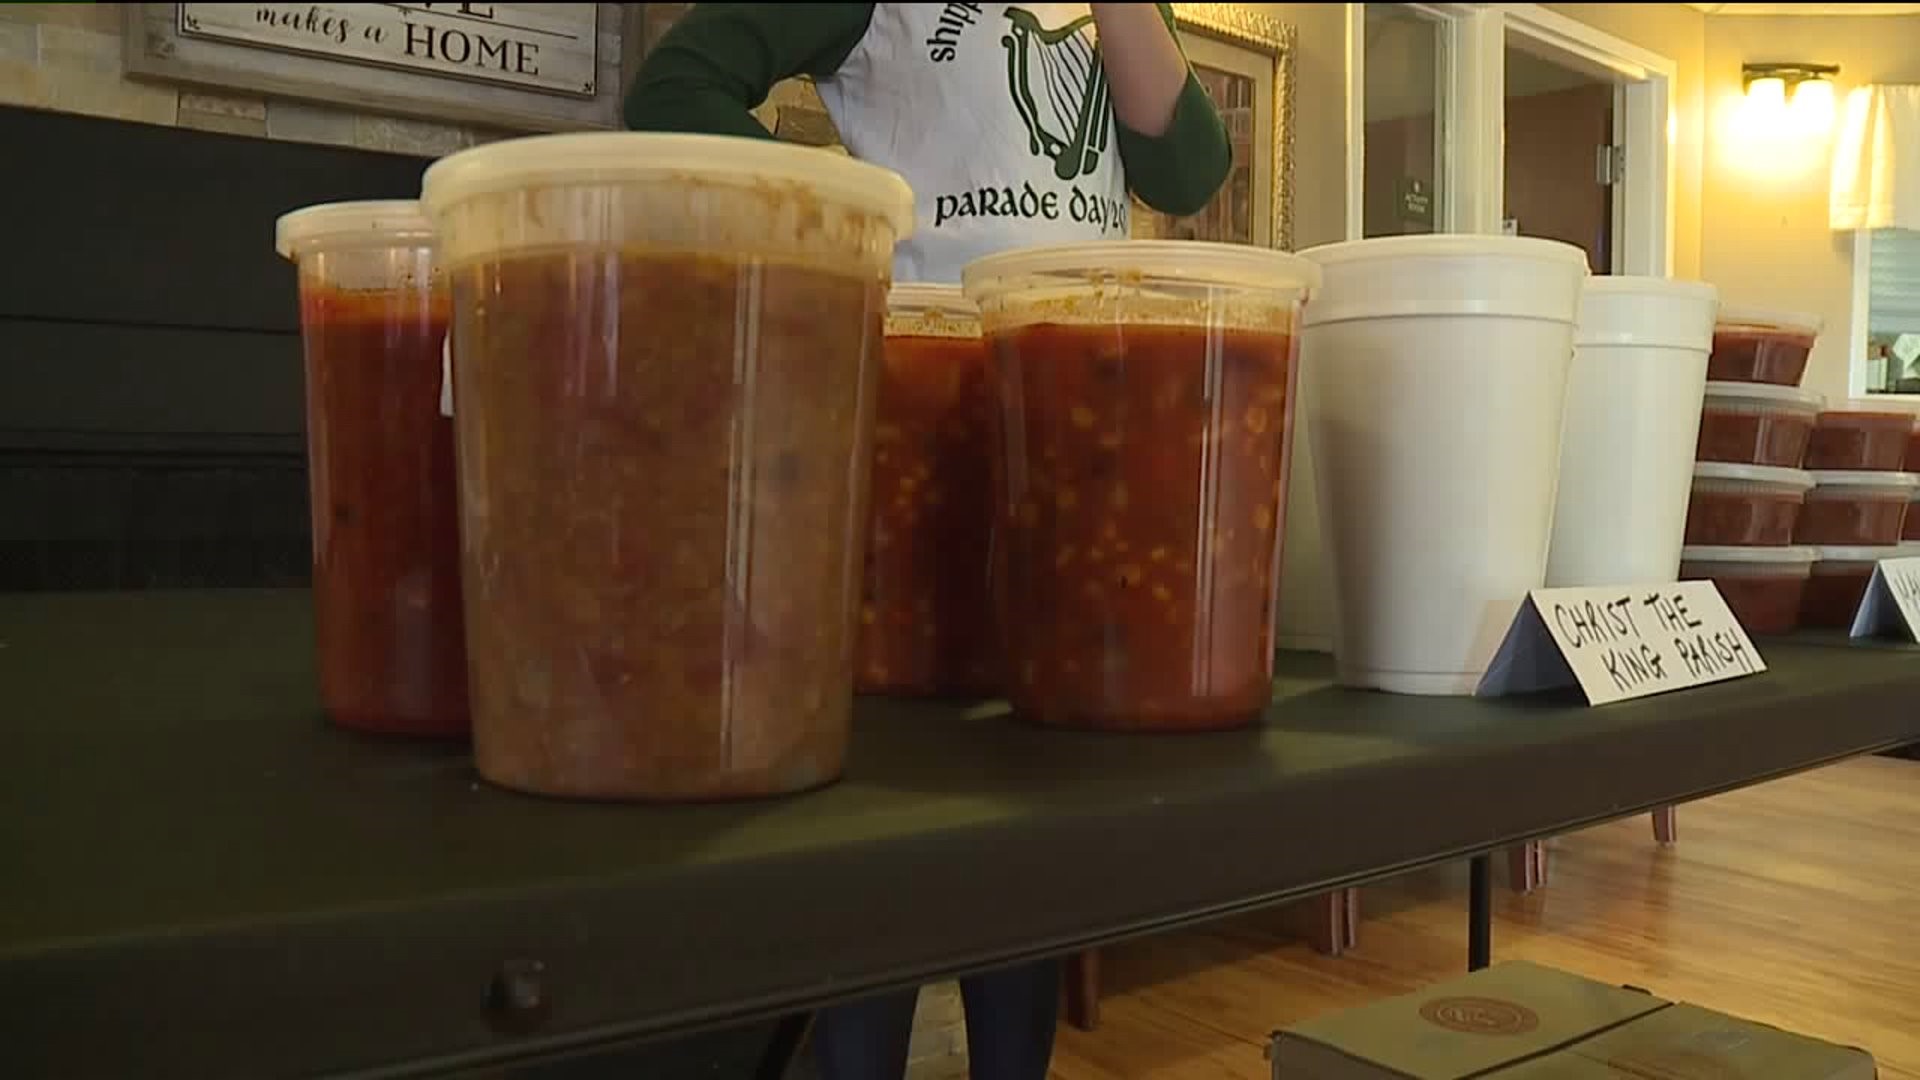 Community Chili Sale to Benefit Family